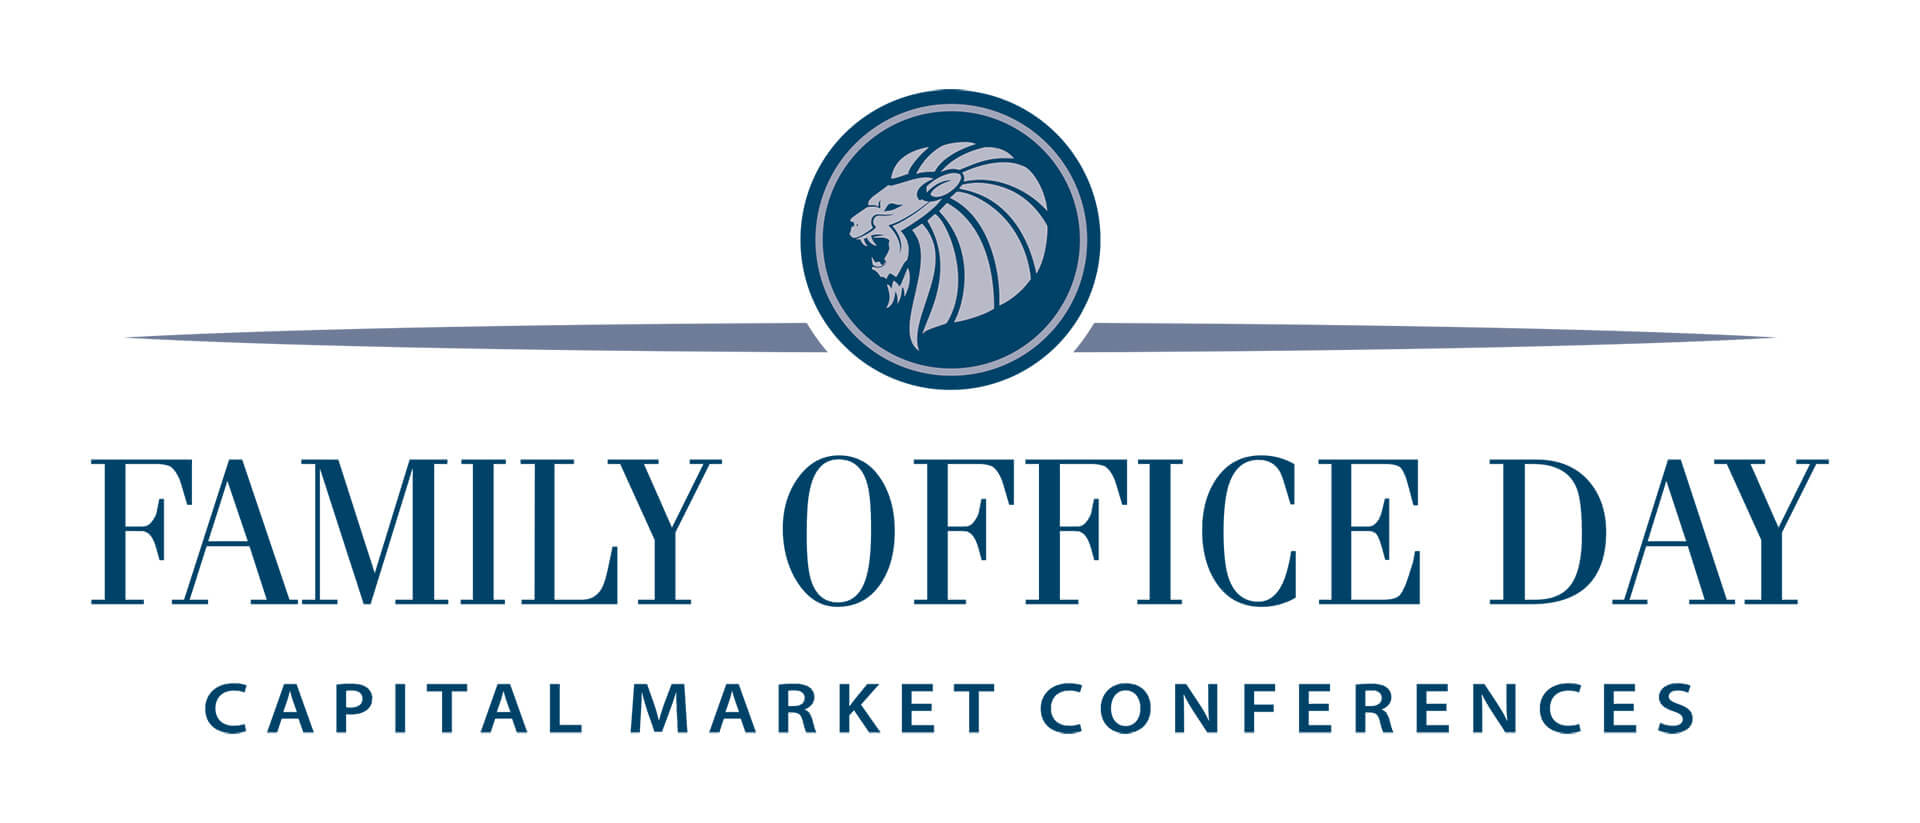 35th Capital Market Conference Family Office Day on 3 December 2020 at 9.55 am (CET) ONLINE organized by Advantage Strategy & Finance